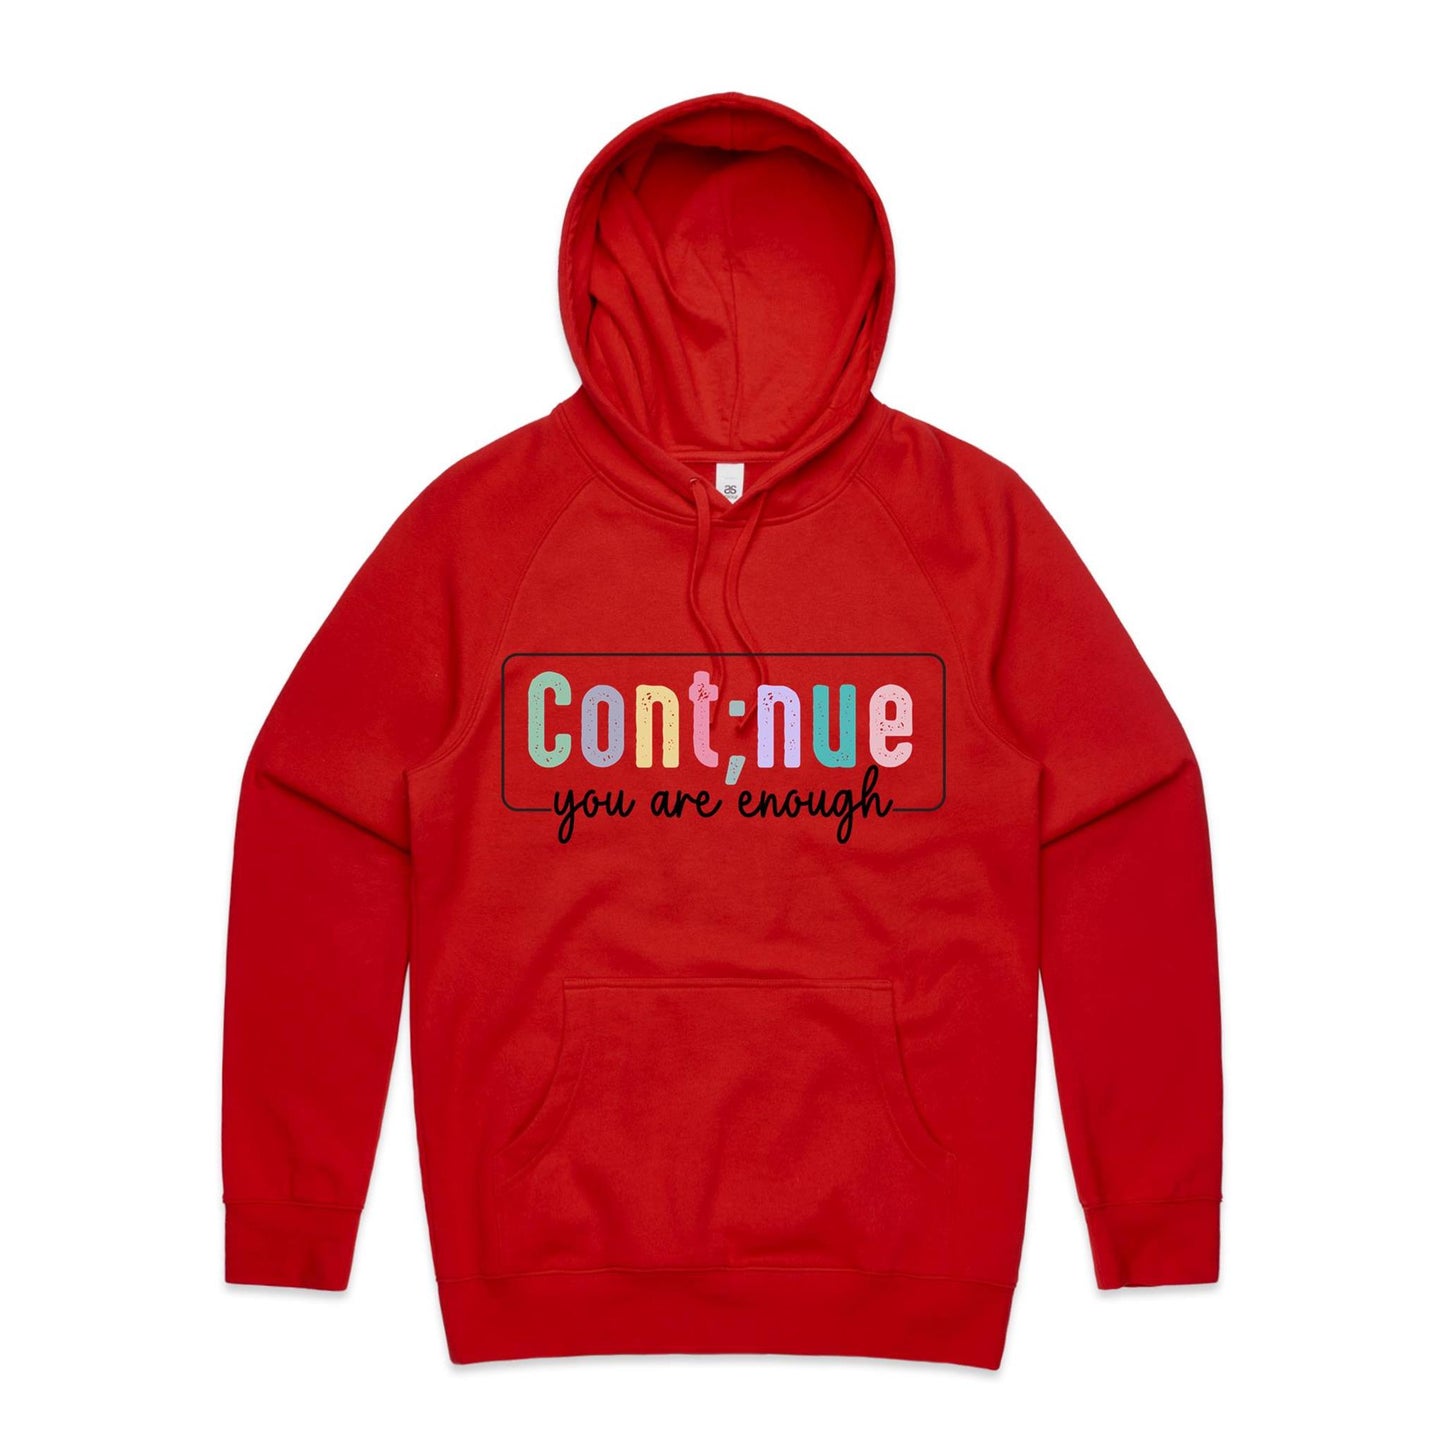 Unisex Hoodie - Continue you are enough